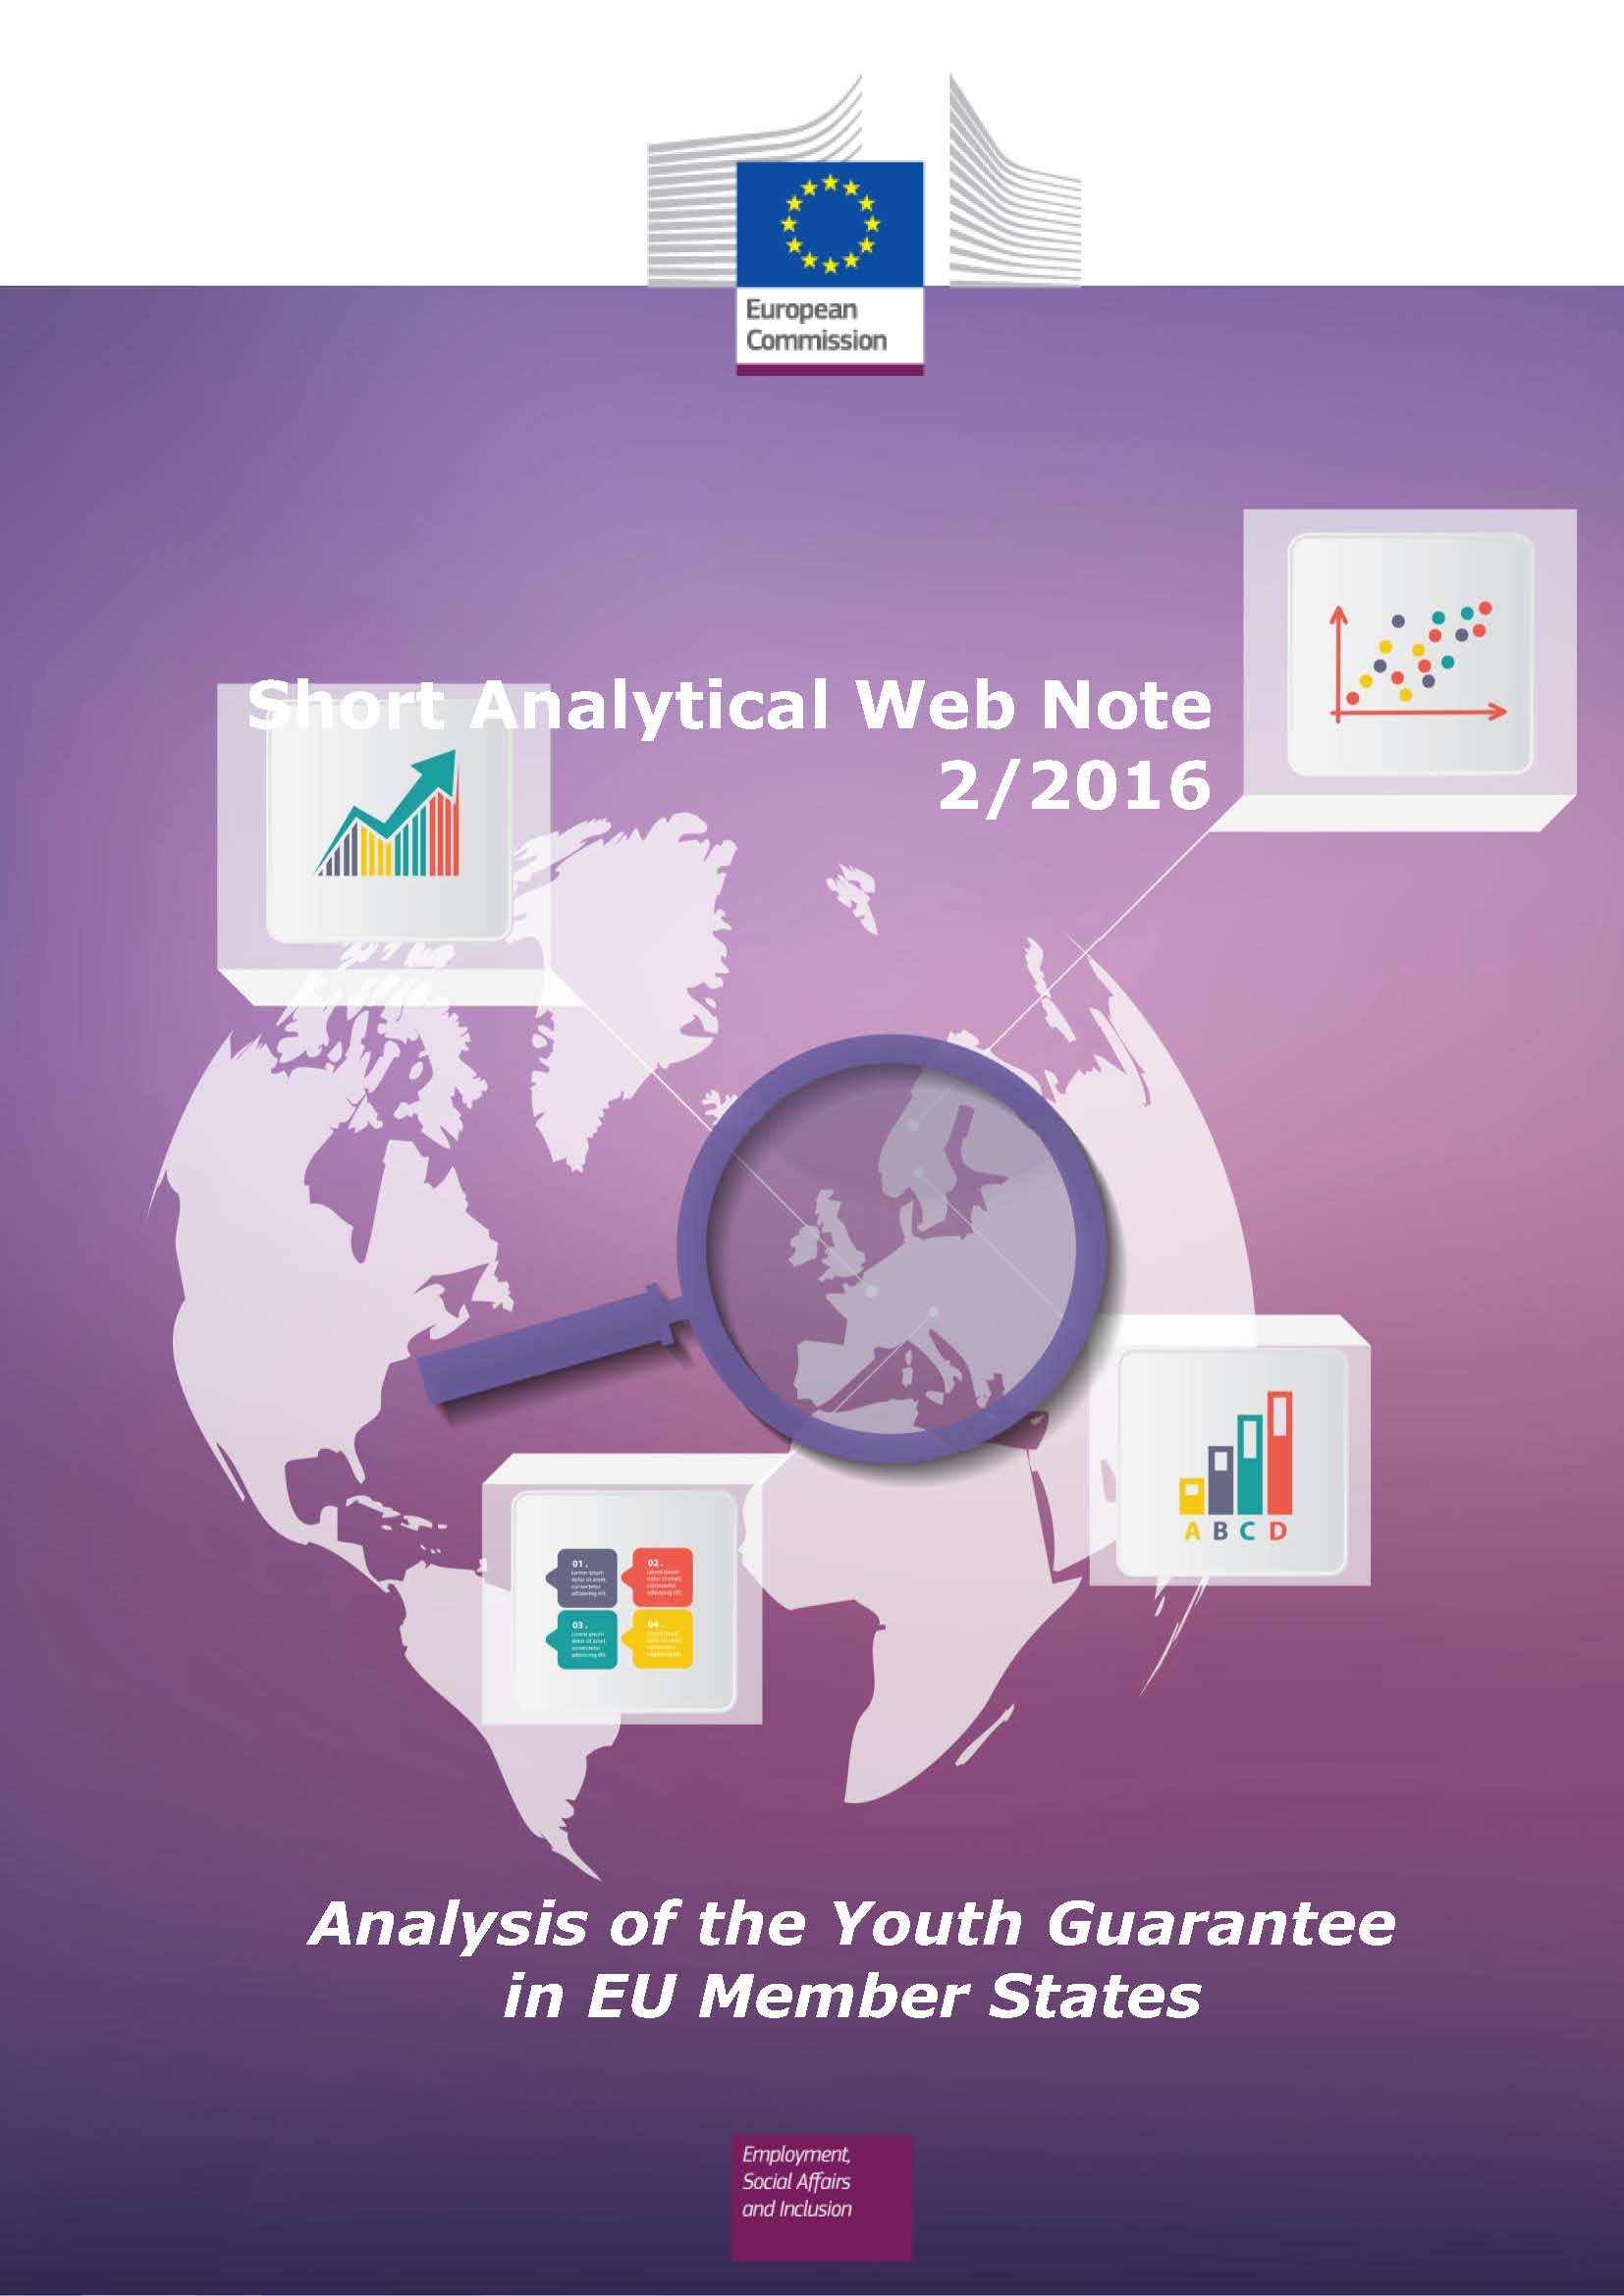 Analytical Web Note 2/2016 - Analysis of the Youth Guarantee in EU Member States